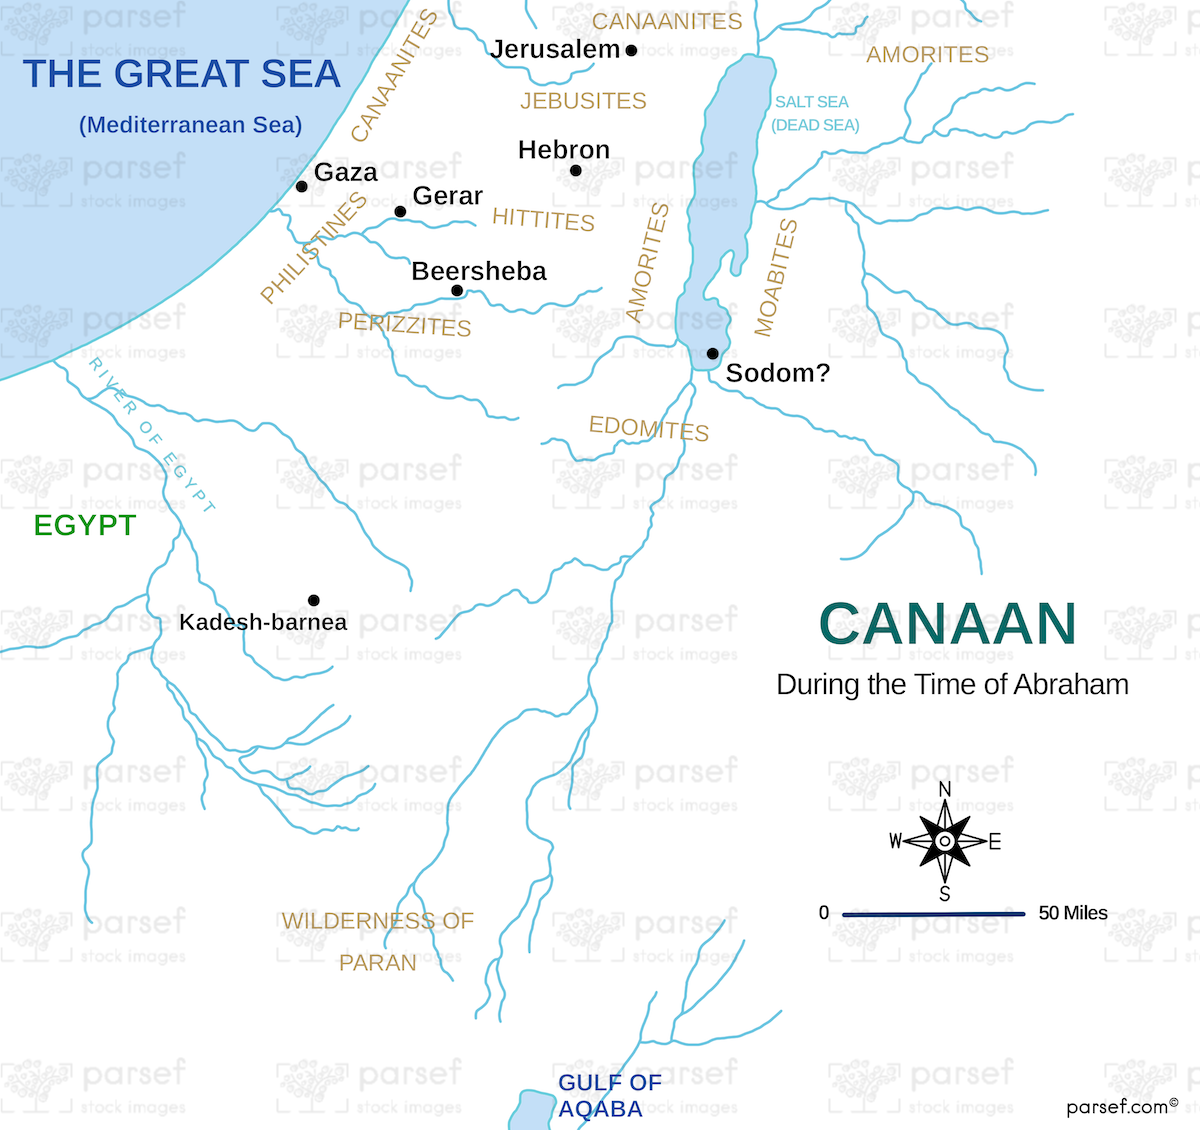 Canaan During the Time of Abraham Map image